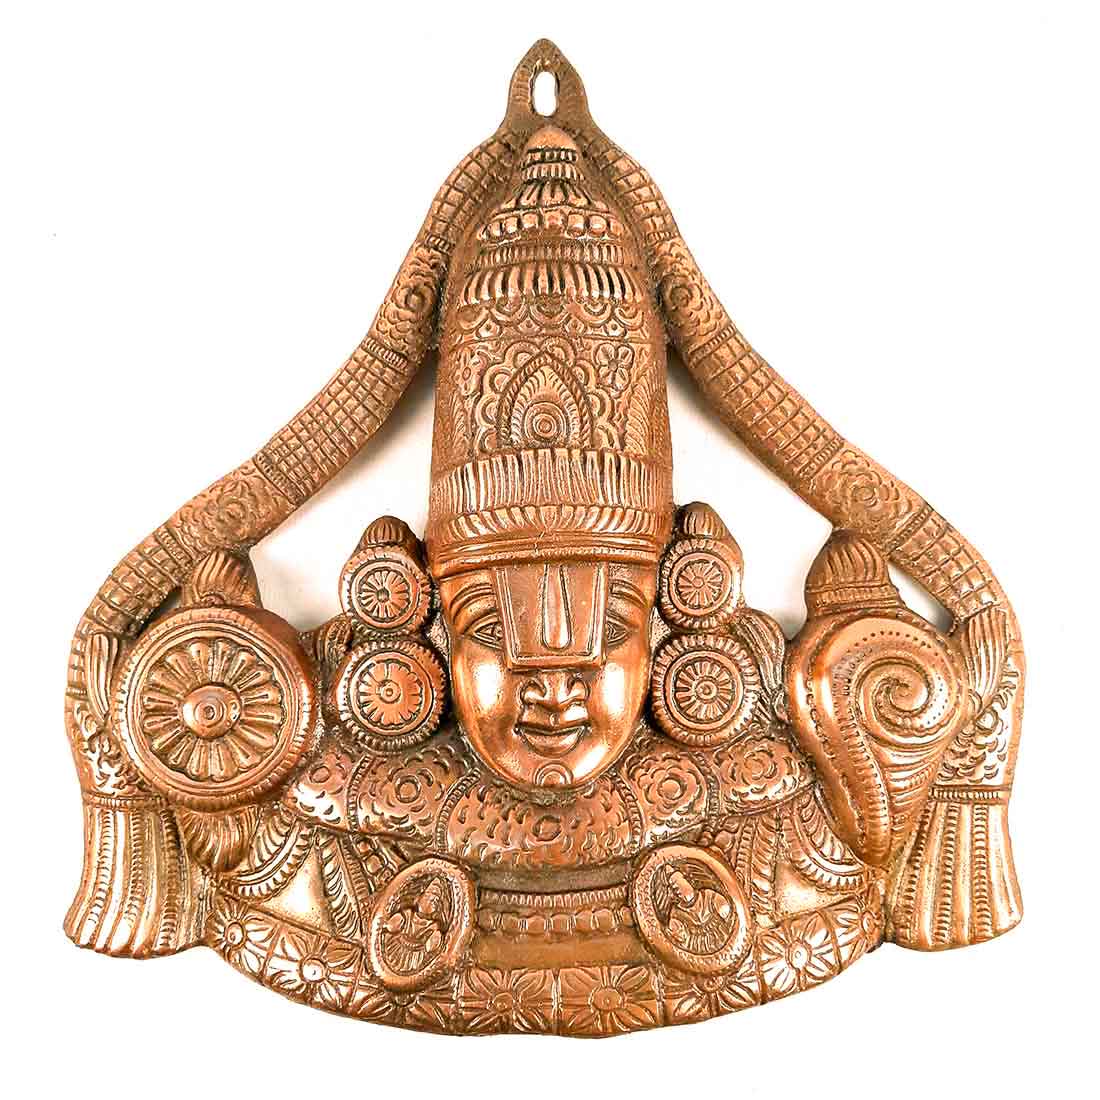 Lord Balaji Wall Hanging Idol | Shri Venkateswara Swami Wall Statue | Tirupati Balaji Wall Hanging Murti - for Home, Living Room, Office, Puja & Gift - 14 Inch